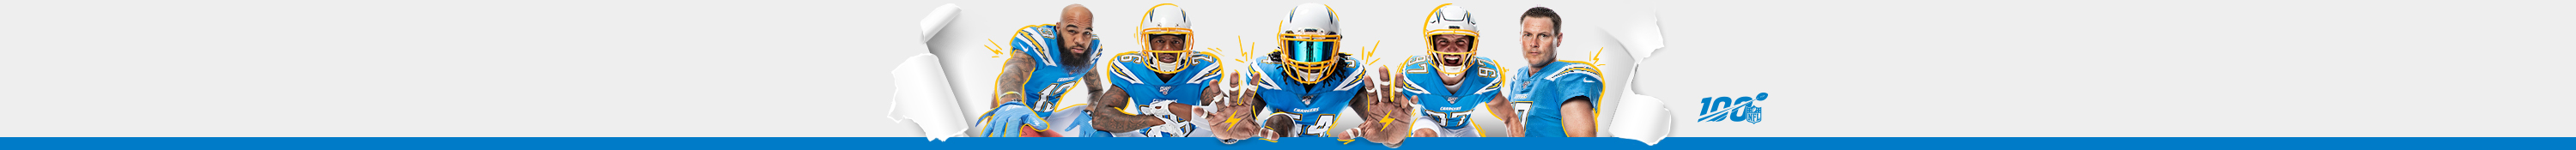 Chargers Rb Depth Chart 2018